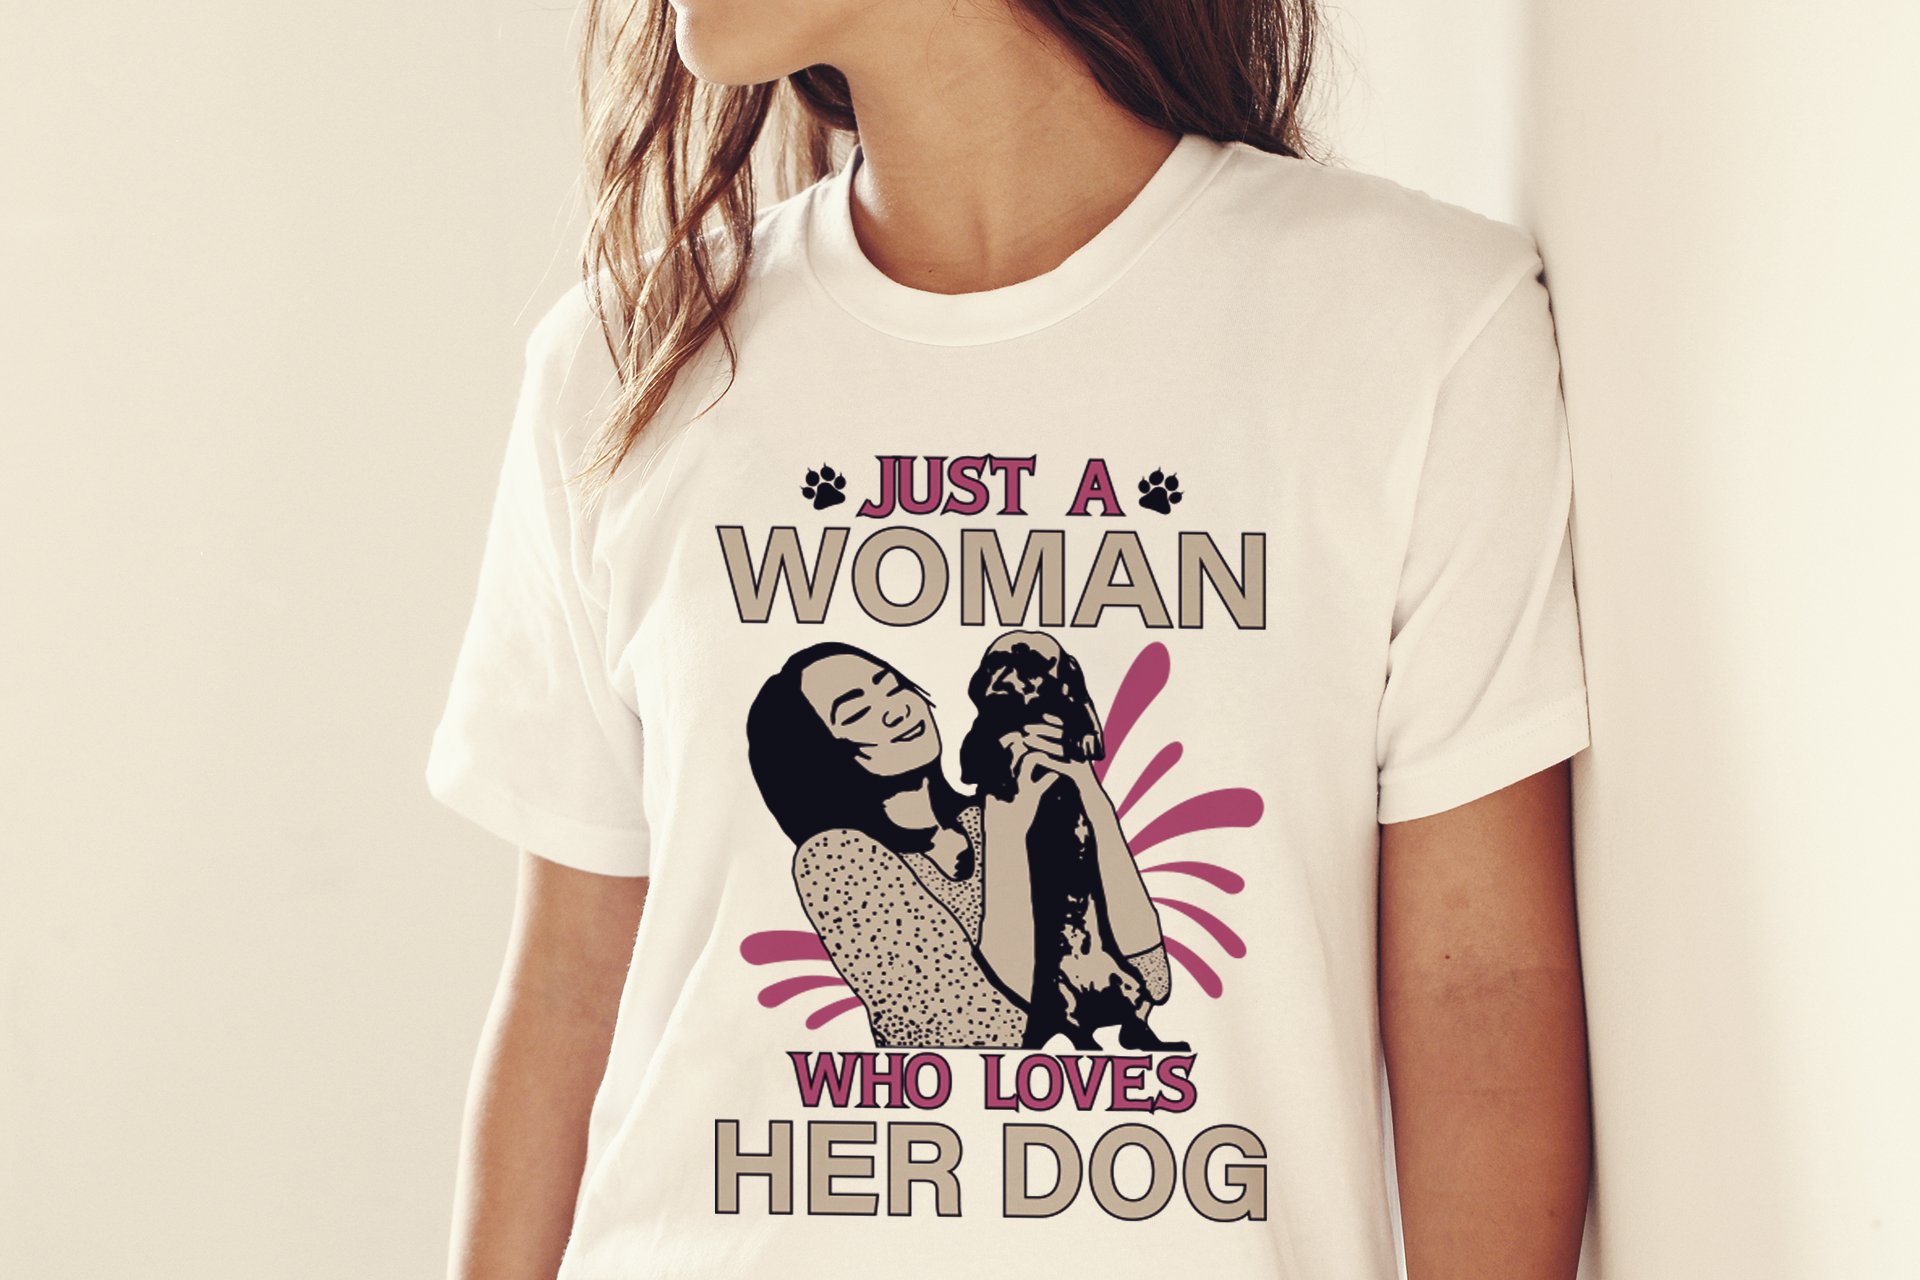 Cool ivory t-shirt for dog lover.